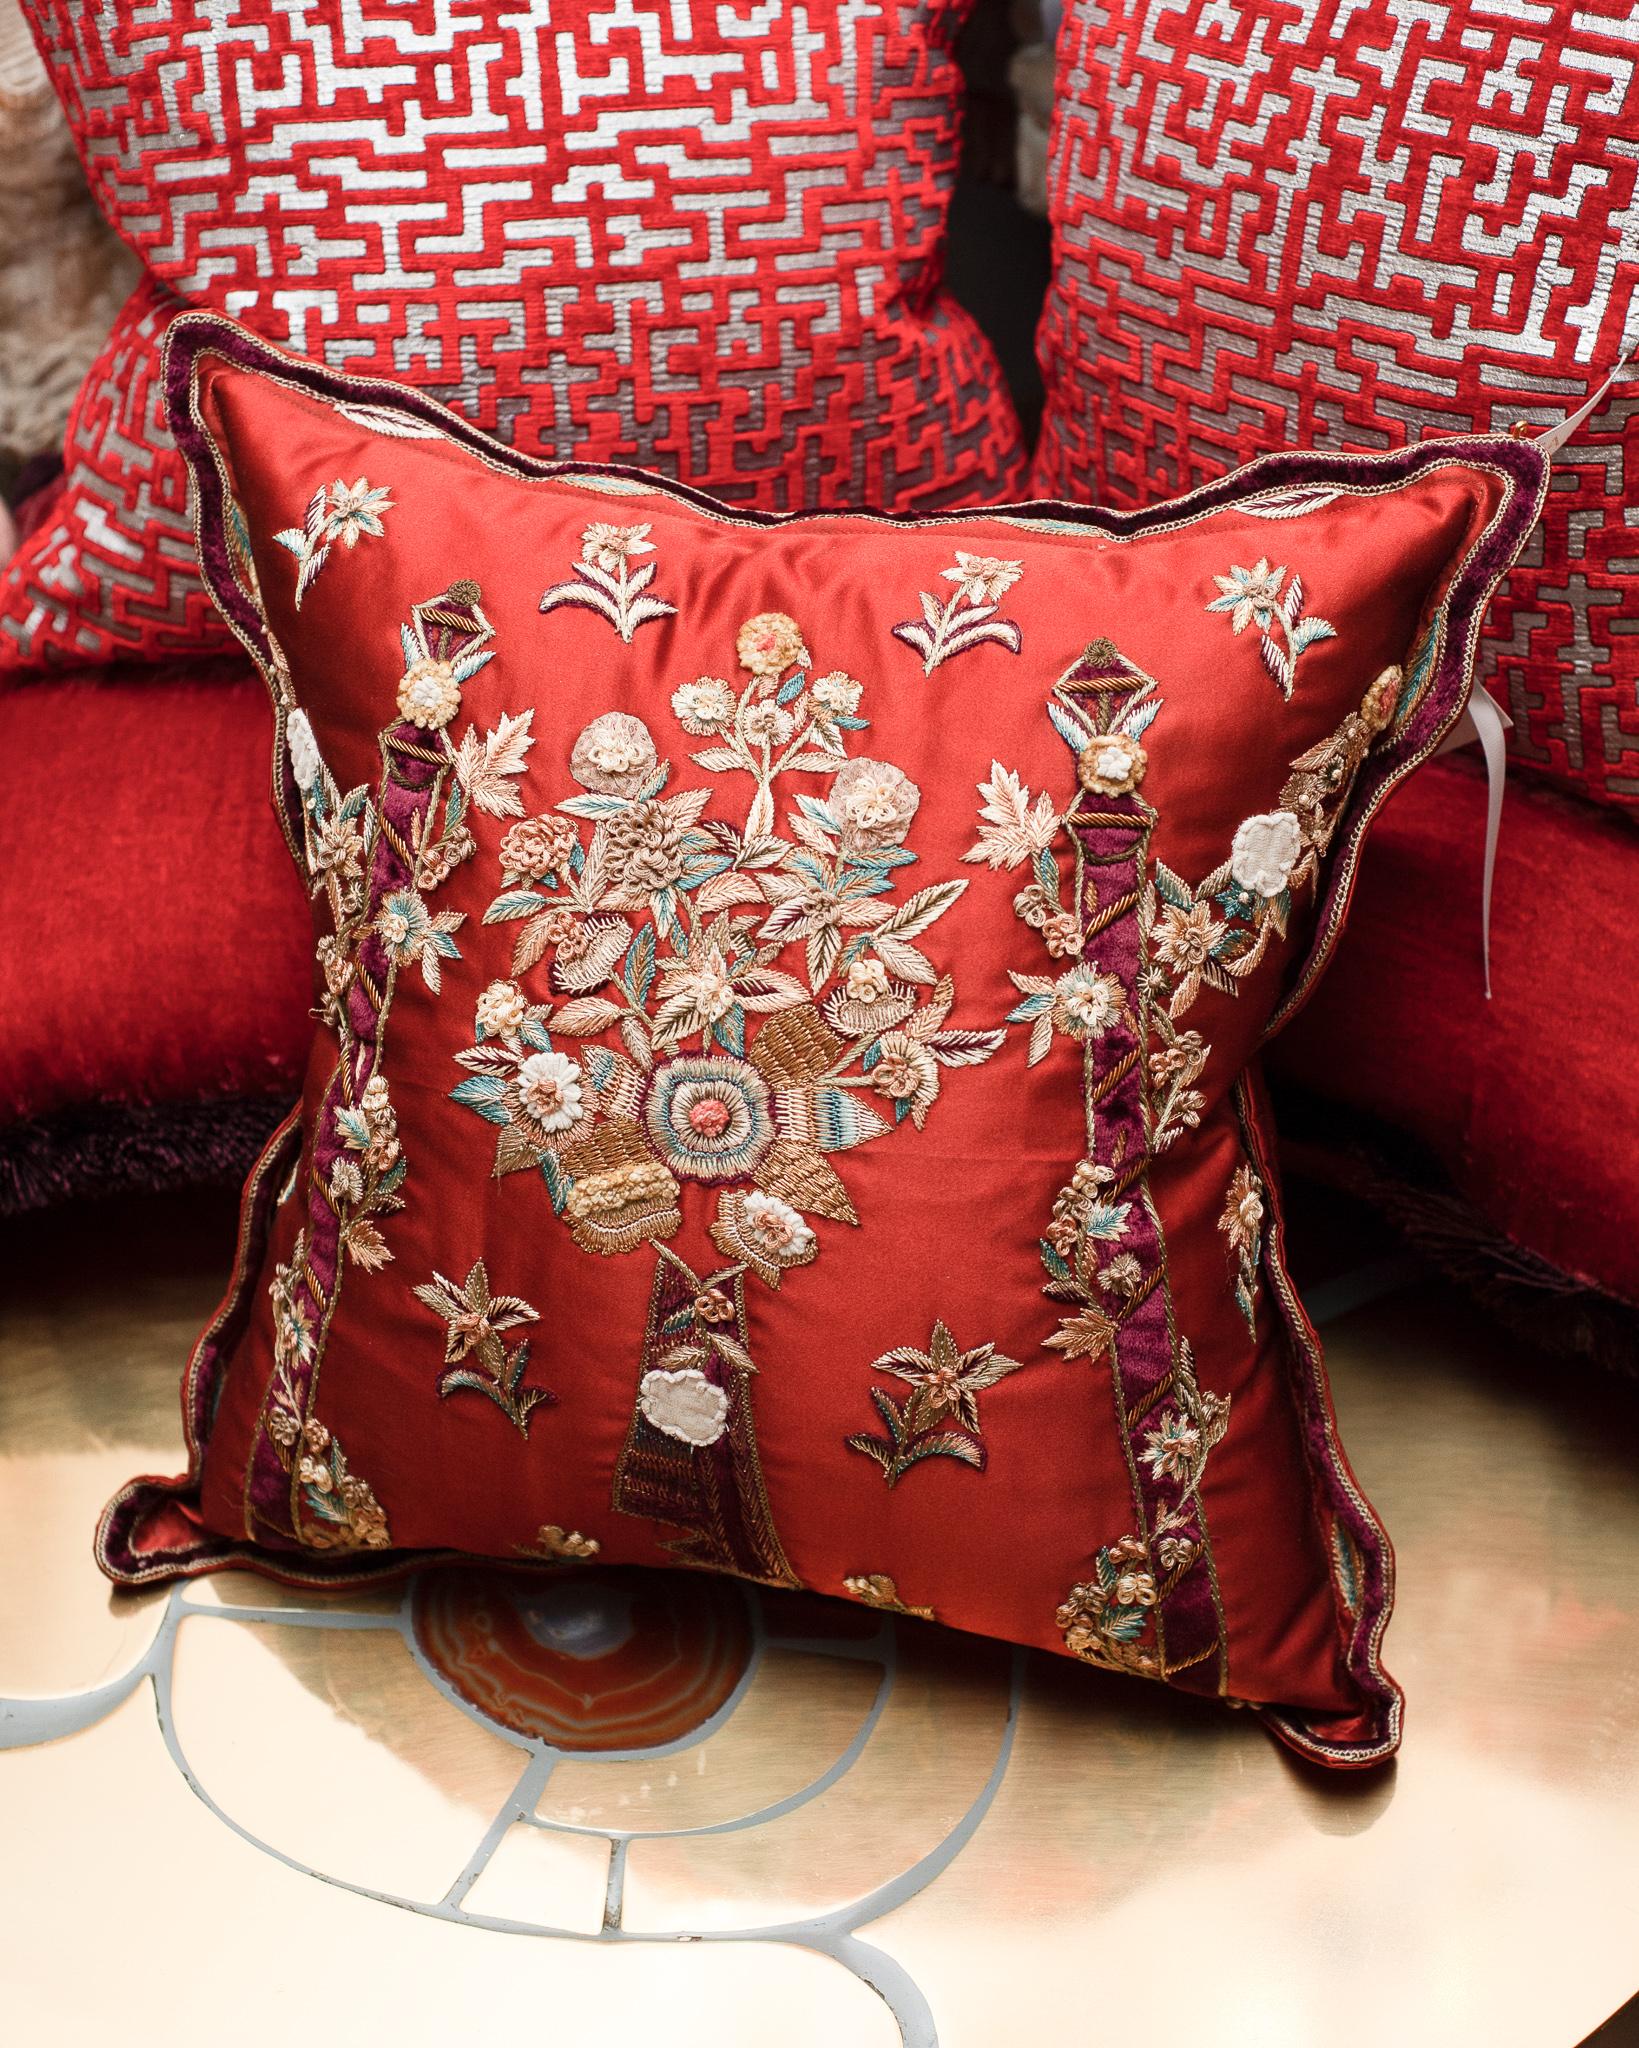 Embroidered Contemporary Red Silk Pillow with Ornate Floral Embroidery